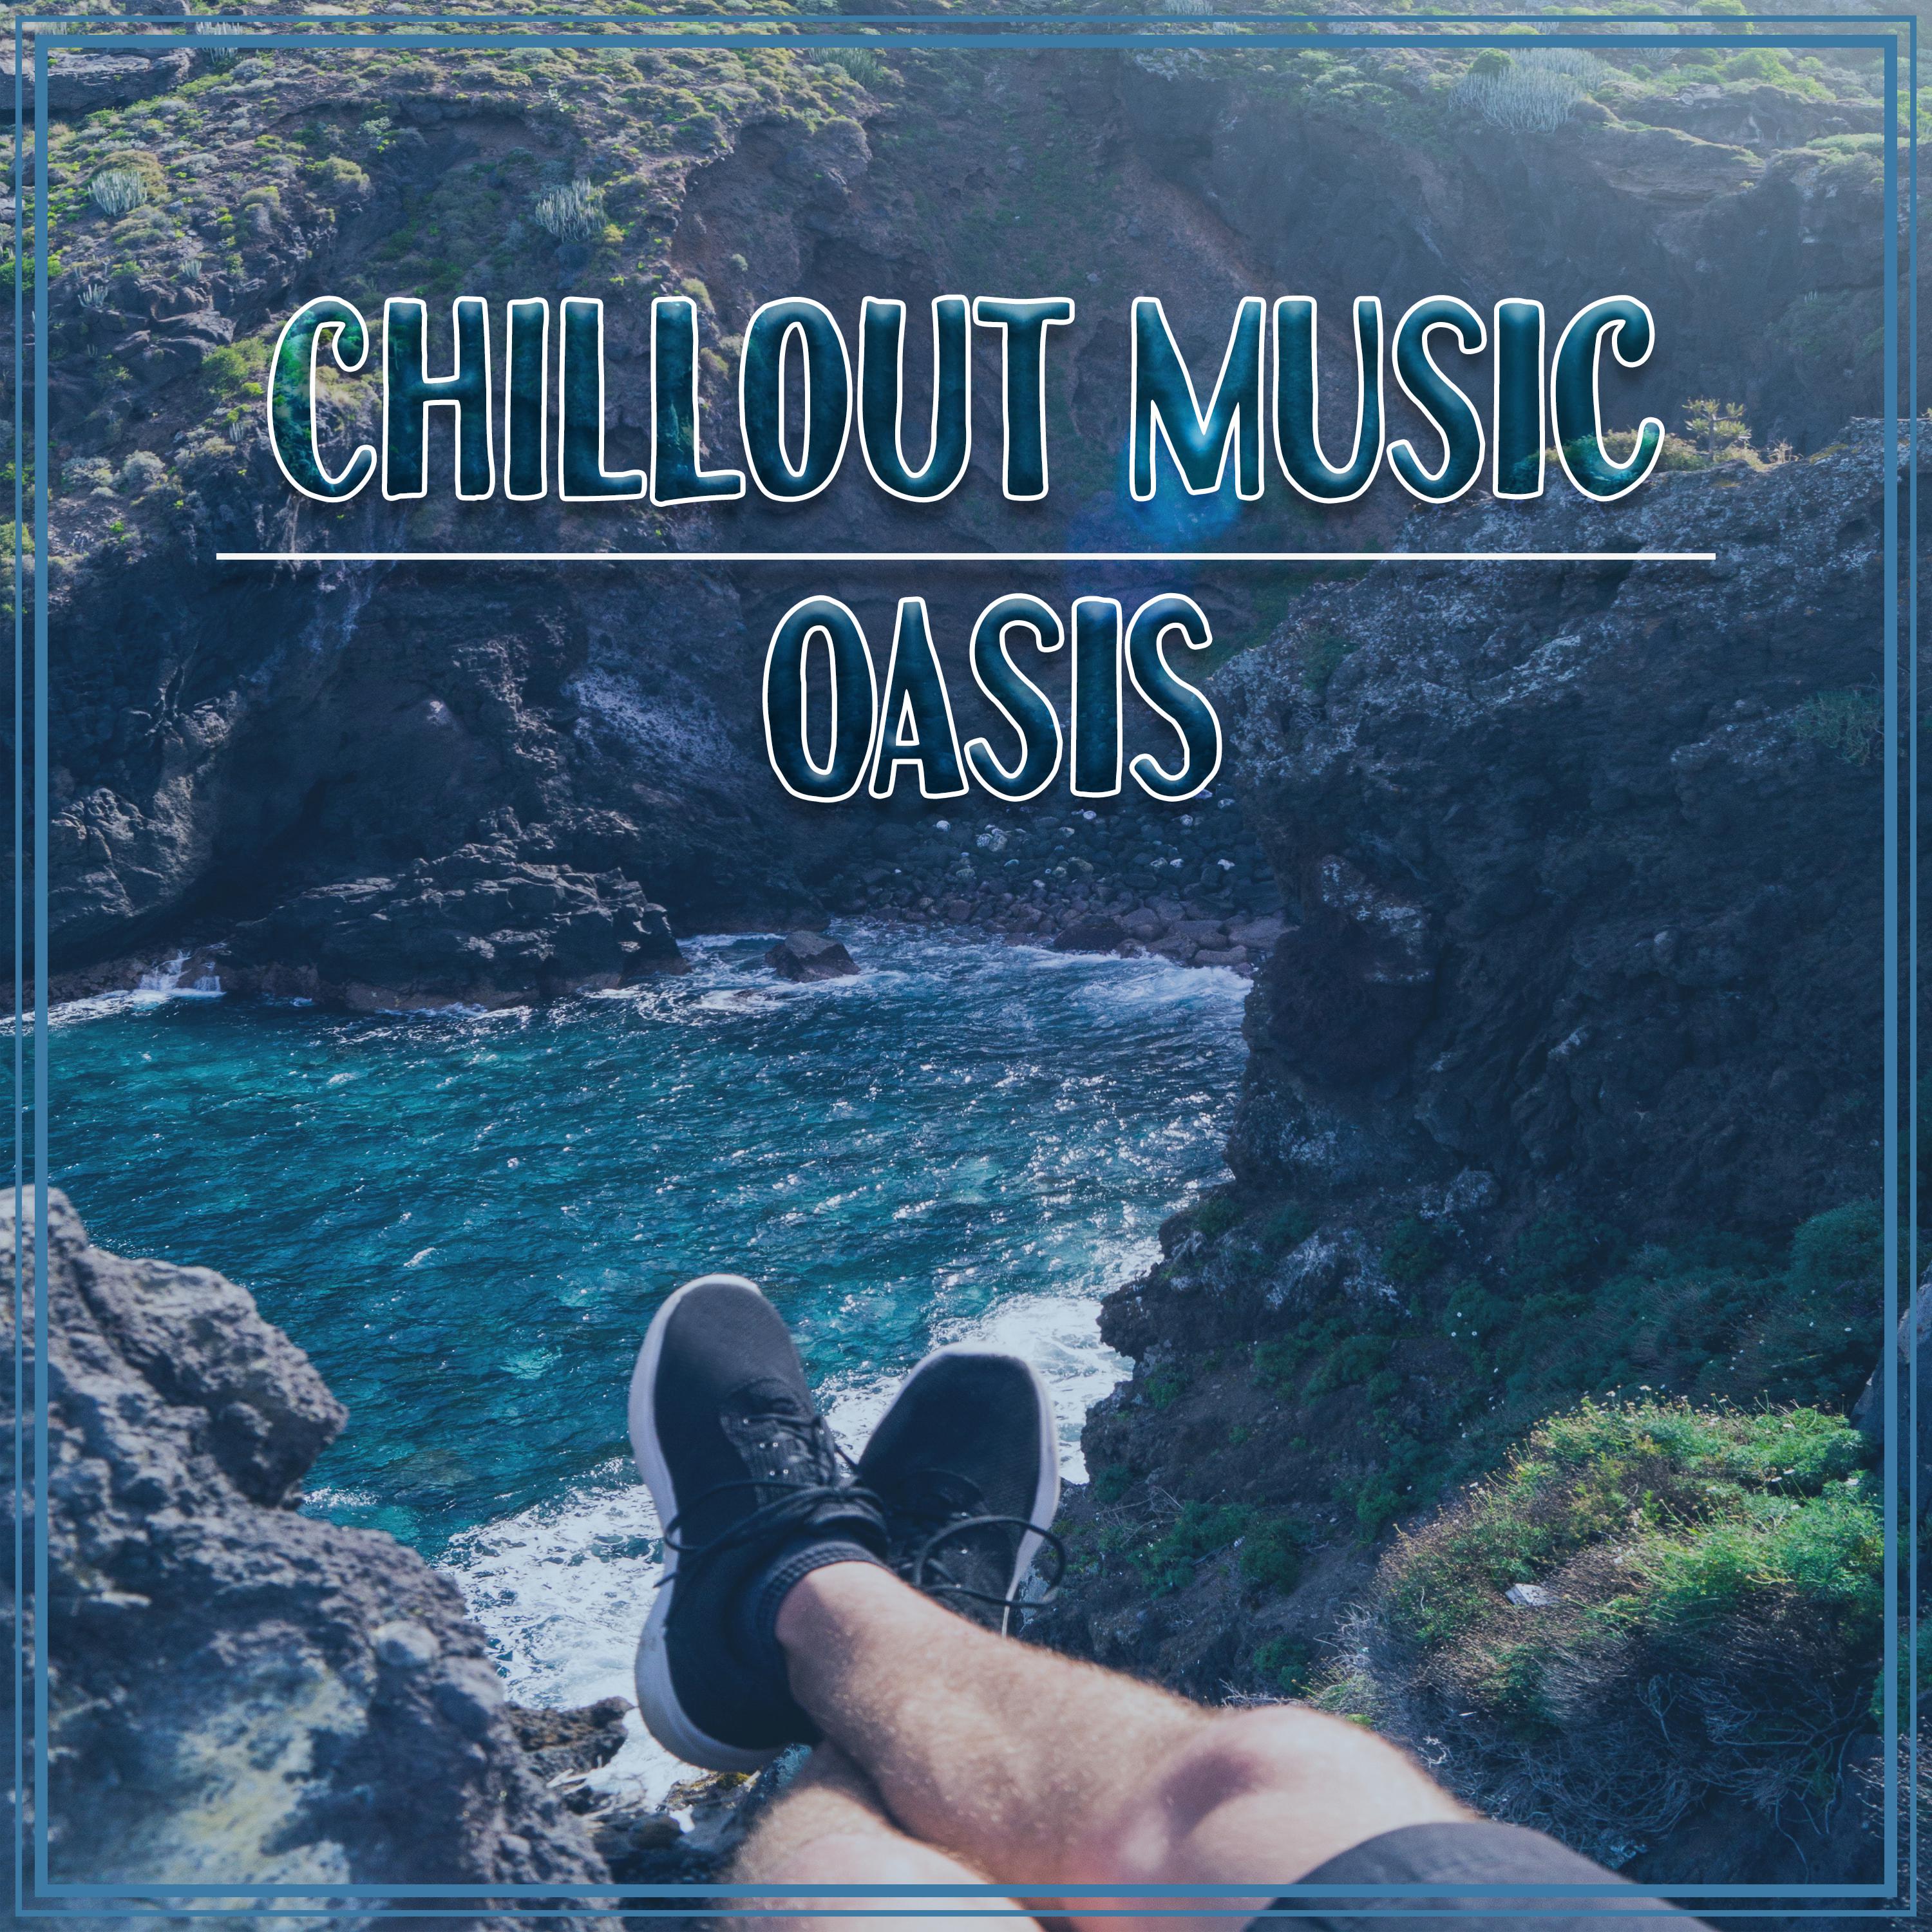 Chillout Music Oasis – Chill Out Hits Music, Most Relaxing Sounds